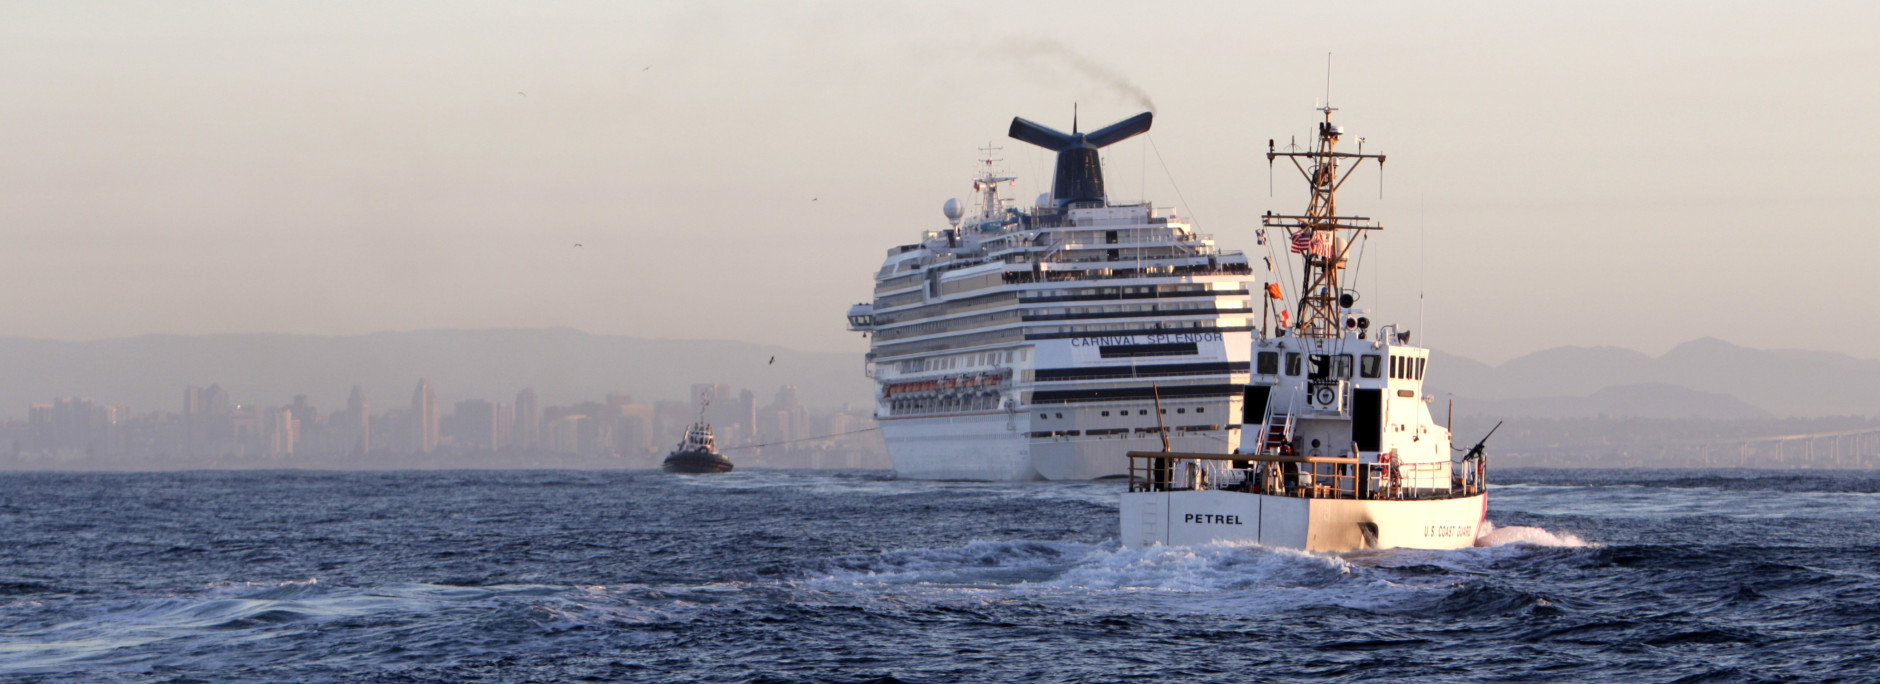 Tugboats bring the disabled cruise ship Carnival Splendor to dock in San Diego, seen in the background, on Thursday, Nov. 11, 2010. (AP Photo/Lenny Ignelzi)